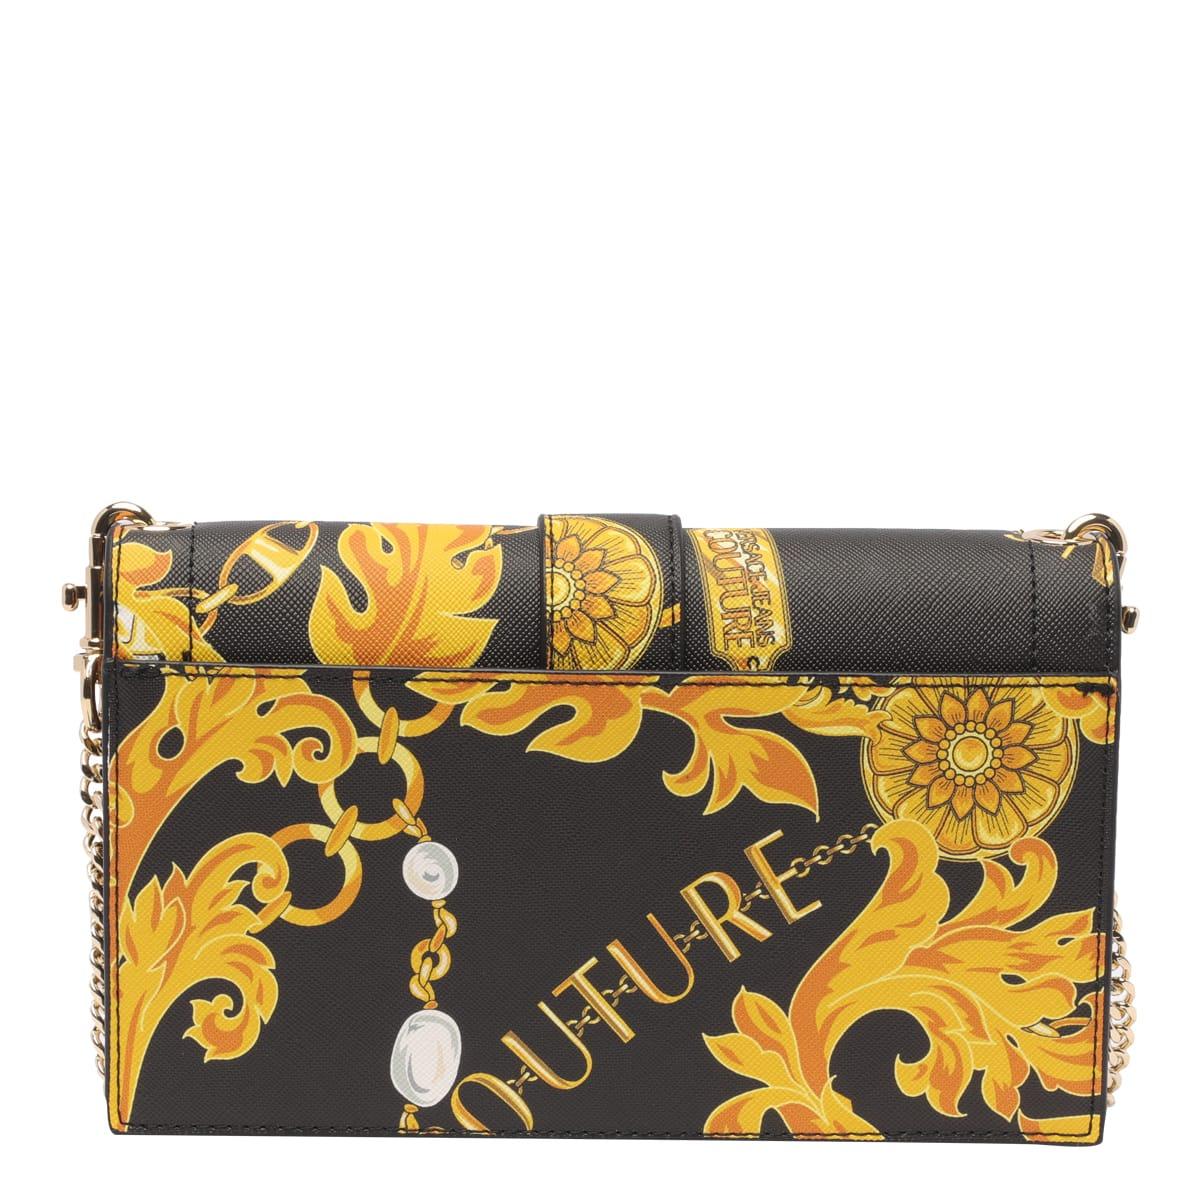 Versace Jeans Couture Couture1 Pochette in Black | Lyst